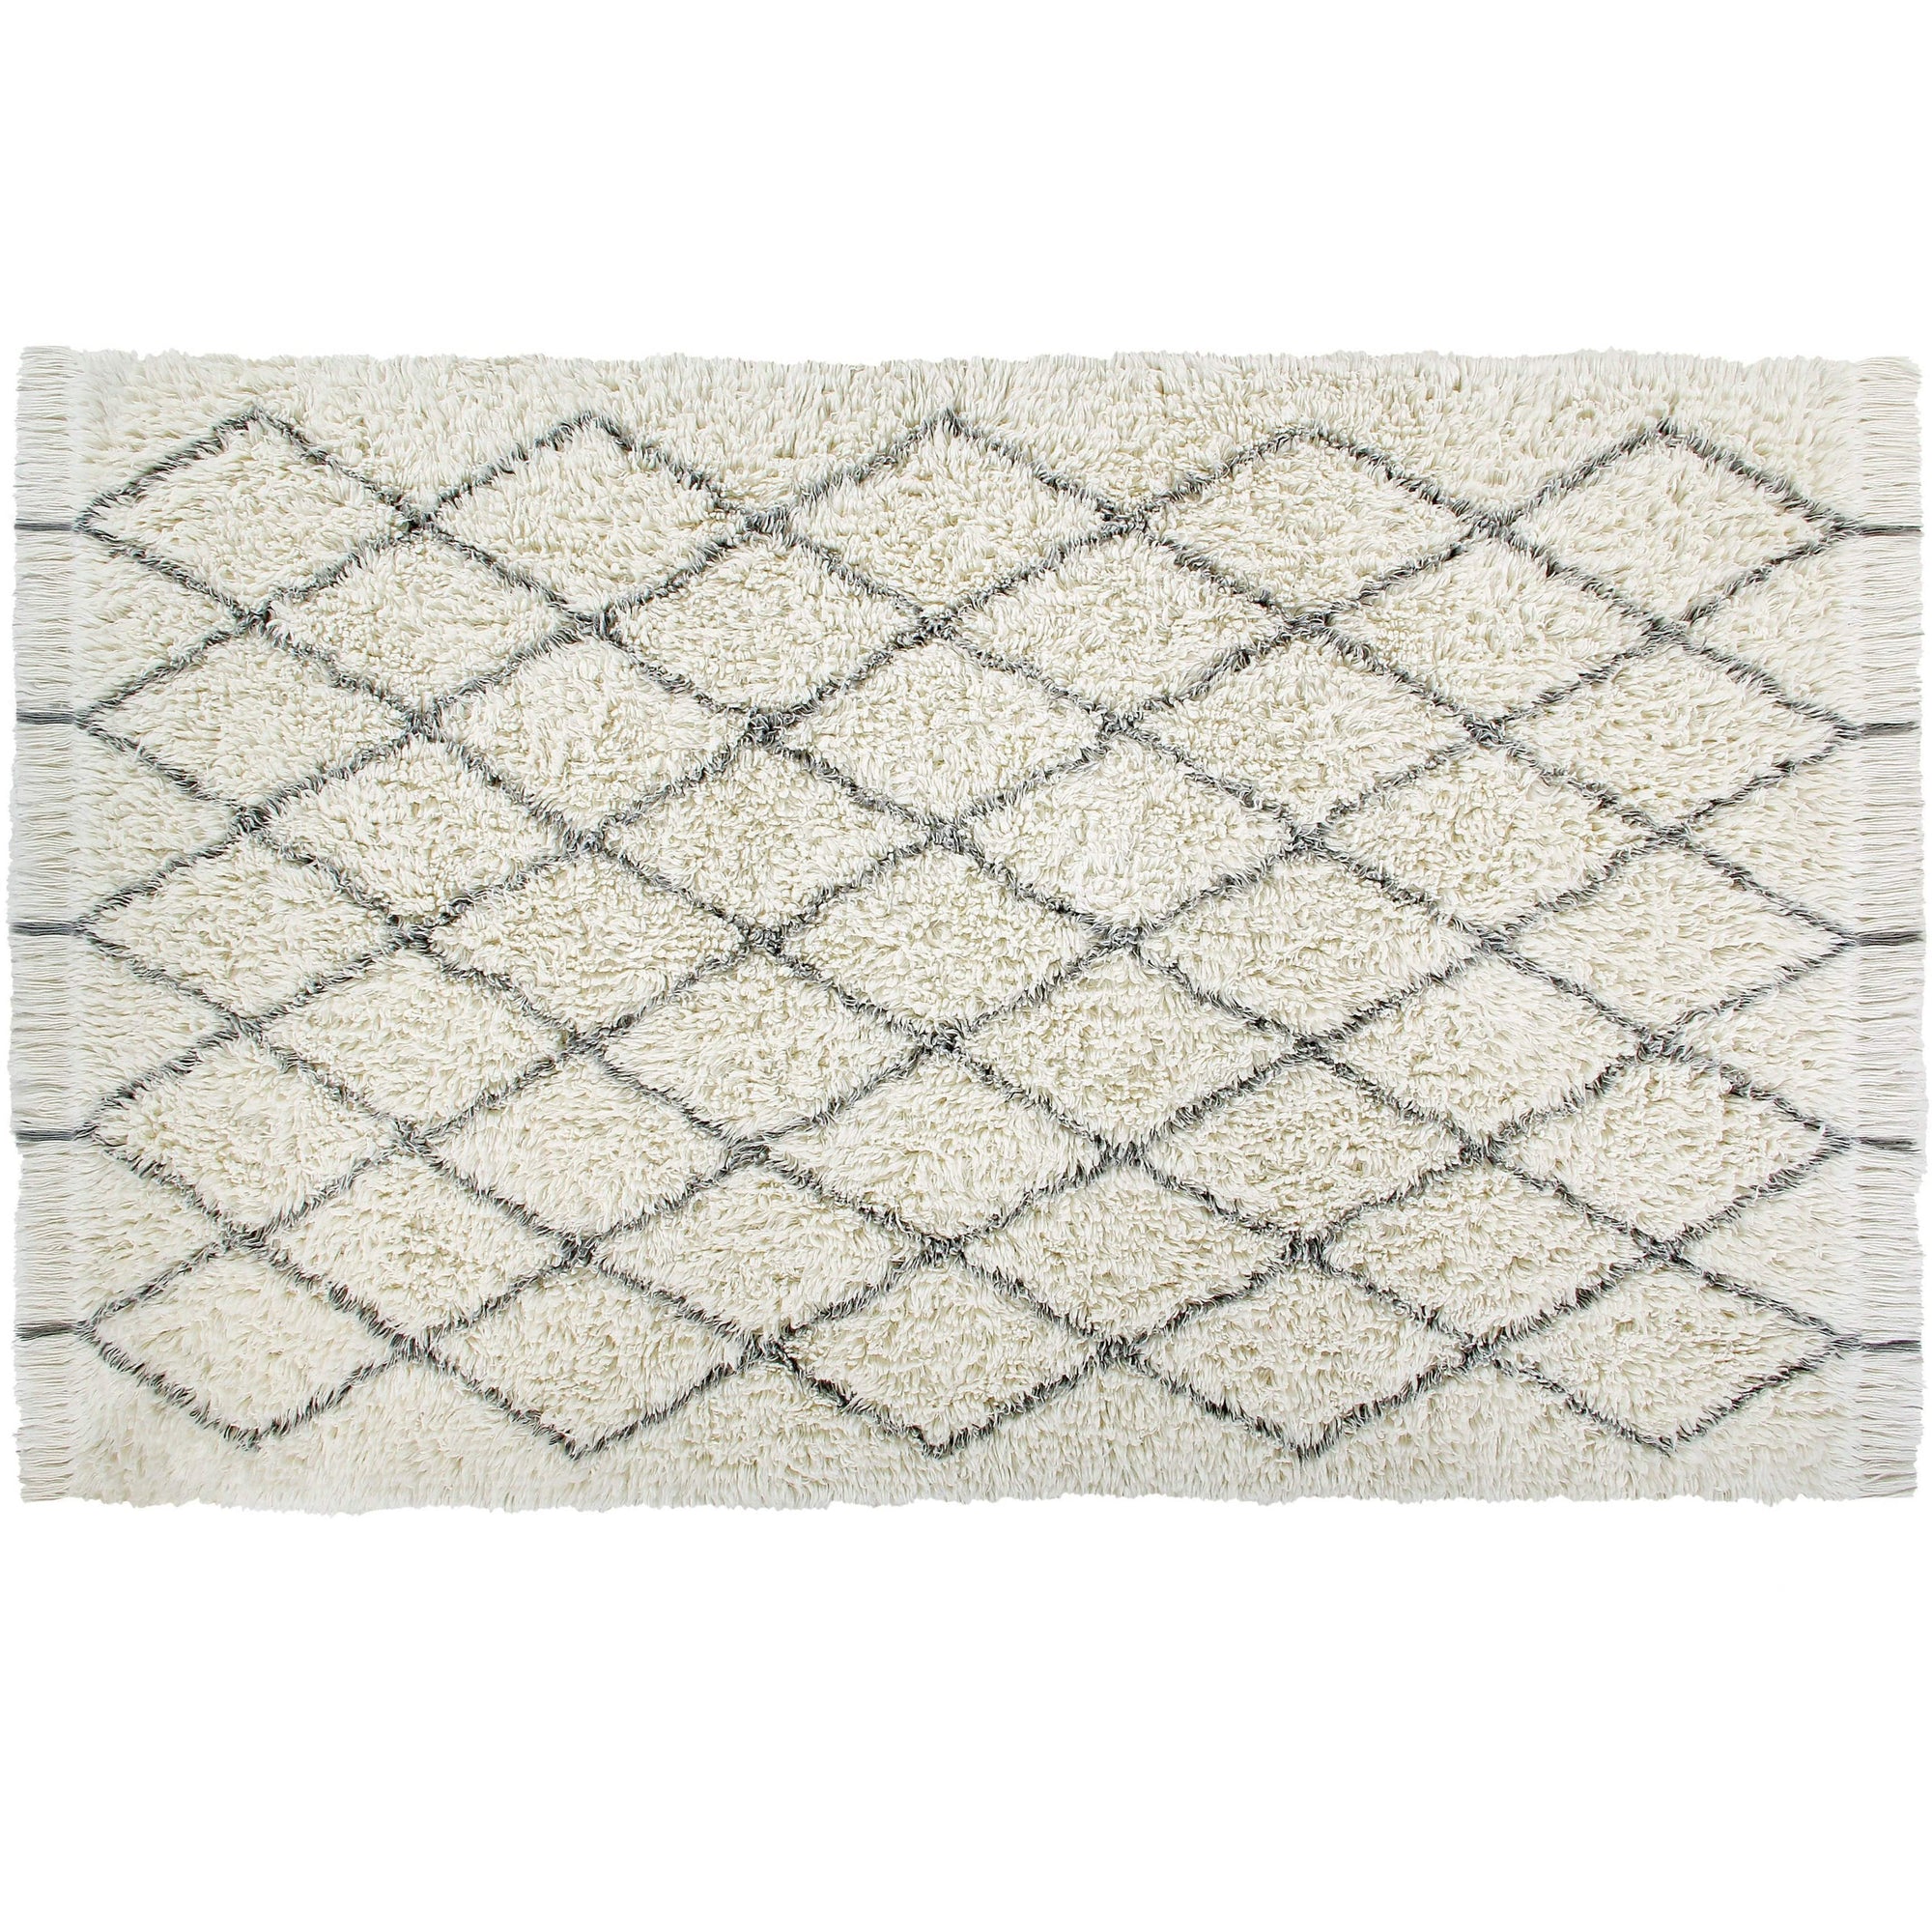 Lorena Canals Berber Soul Wool Washable Area Rug